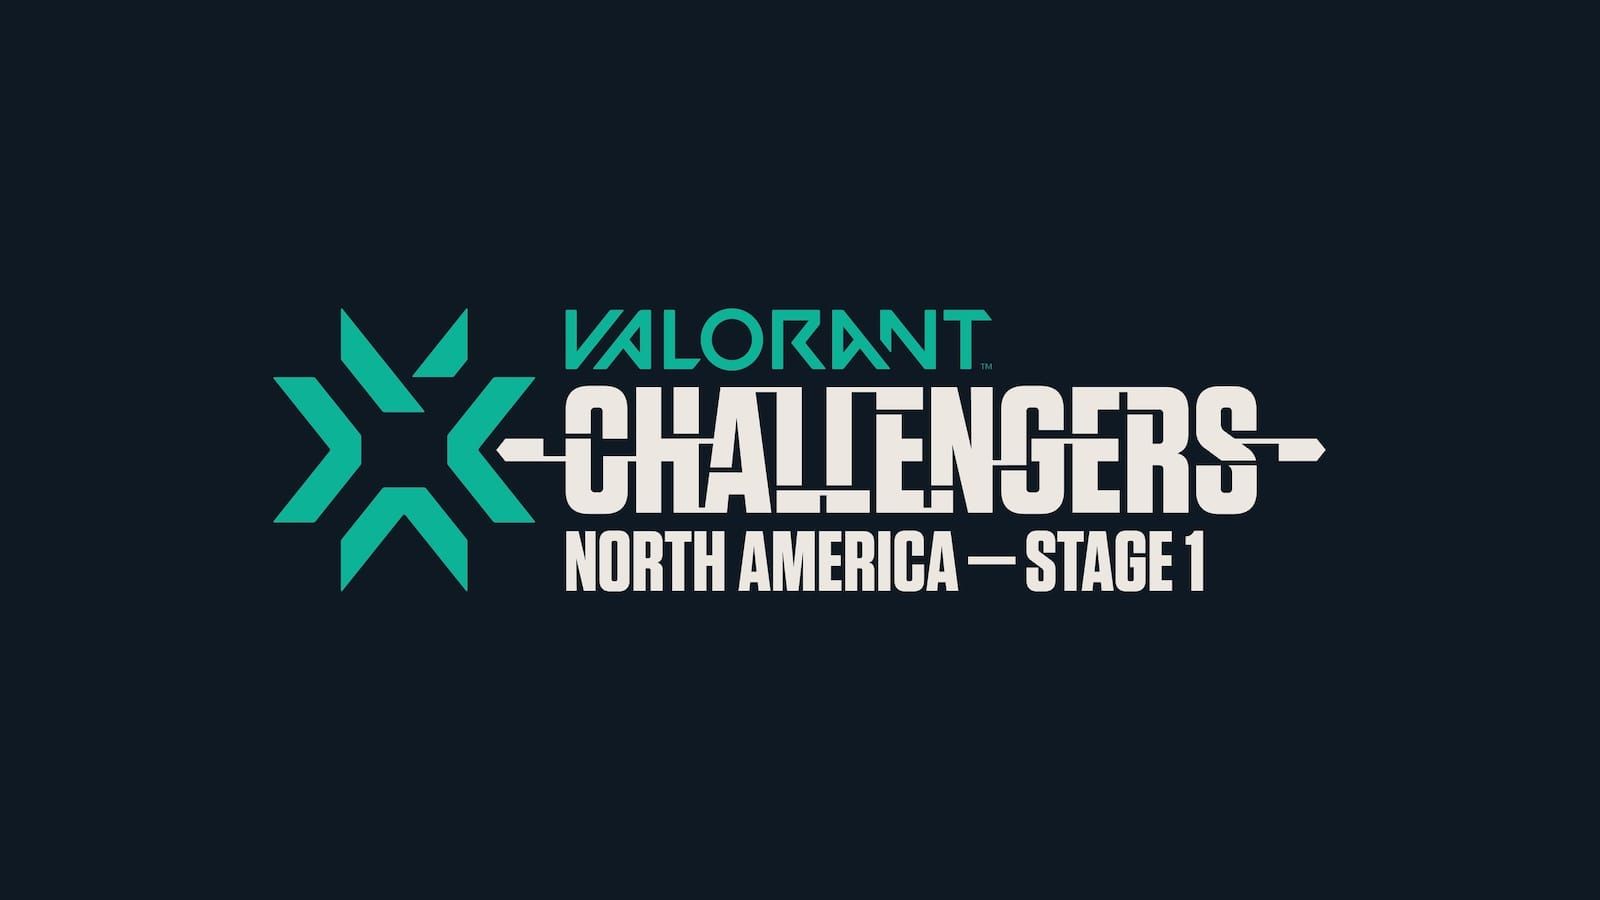 Valorant Challengers North America Stage written in white across black background next to team Valorant logo